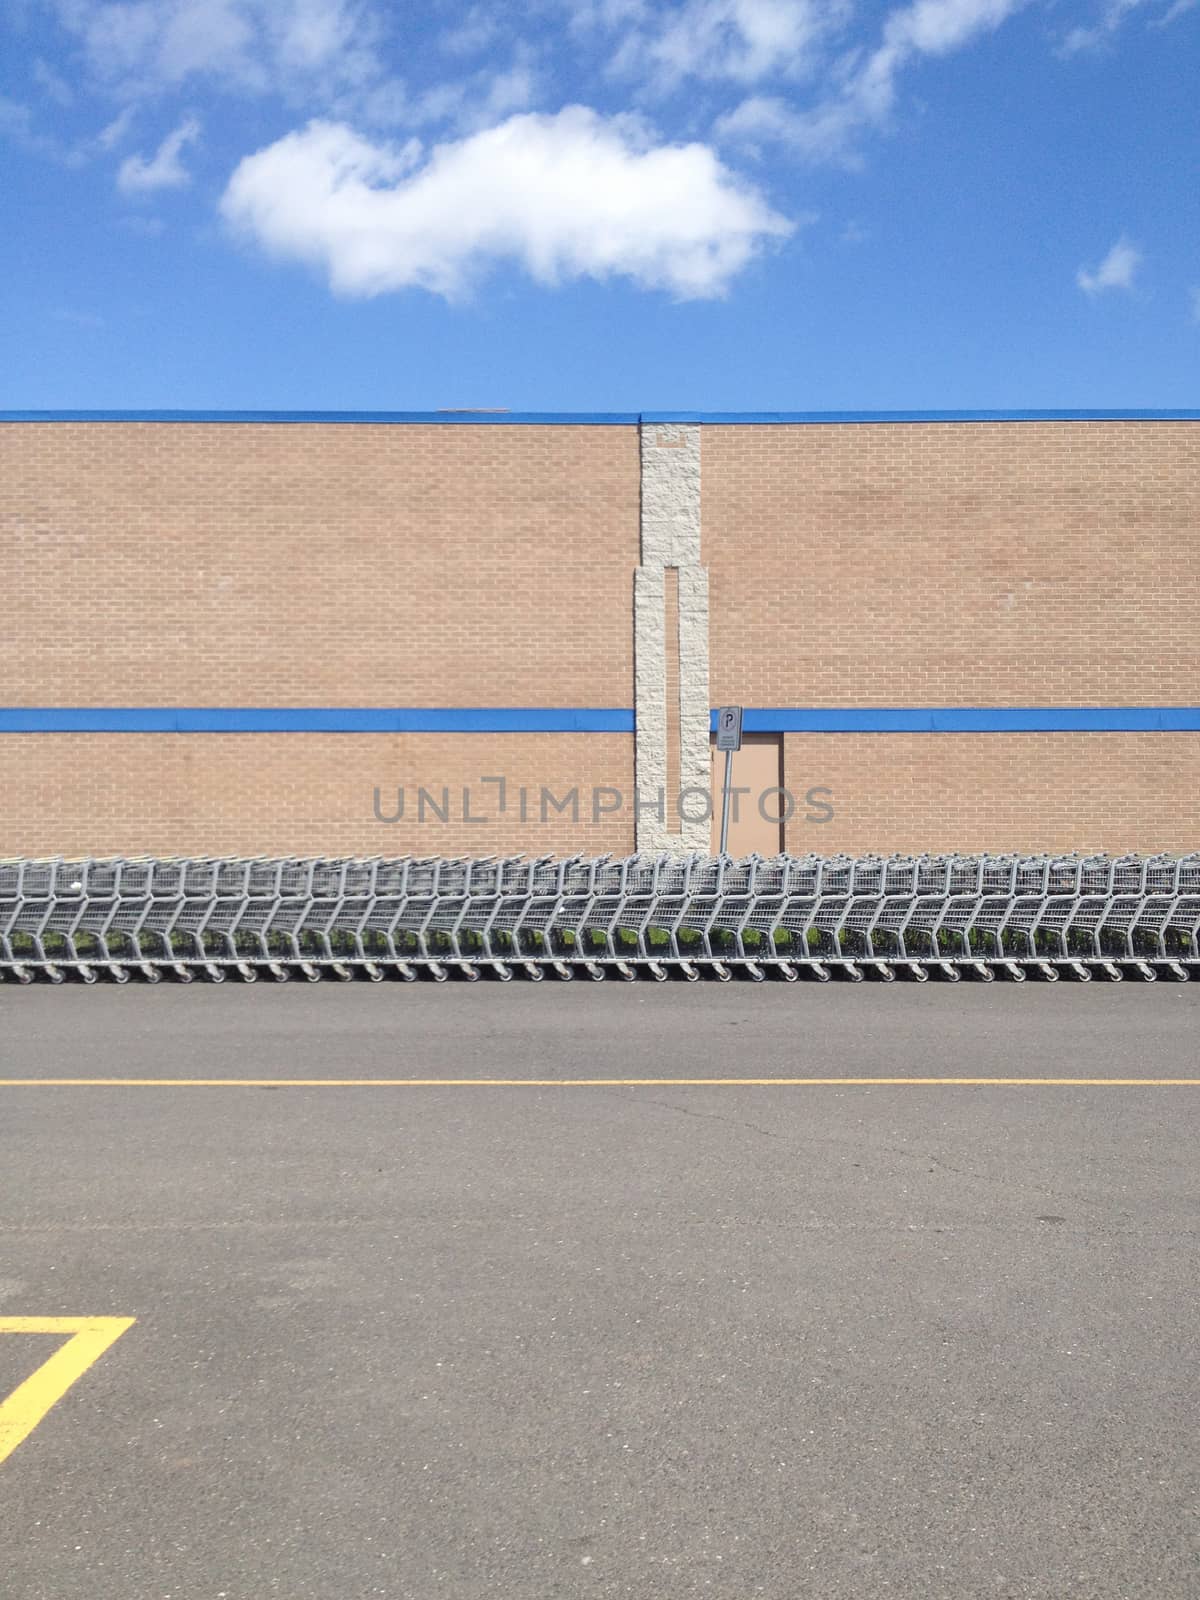 Shopping carts stored outside a store